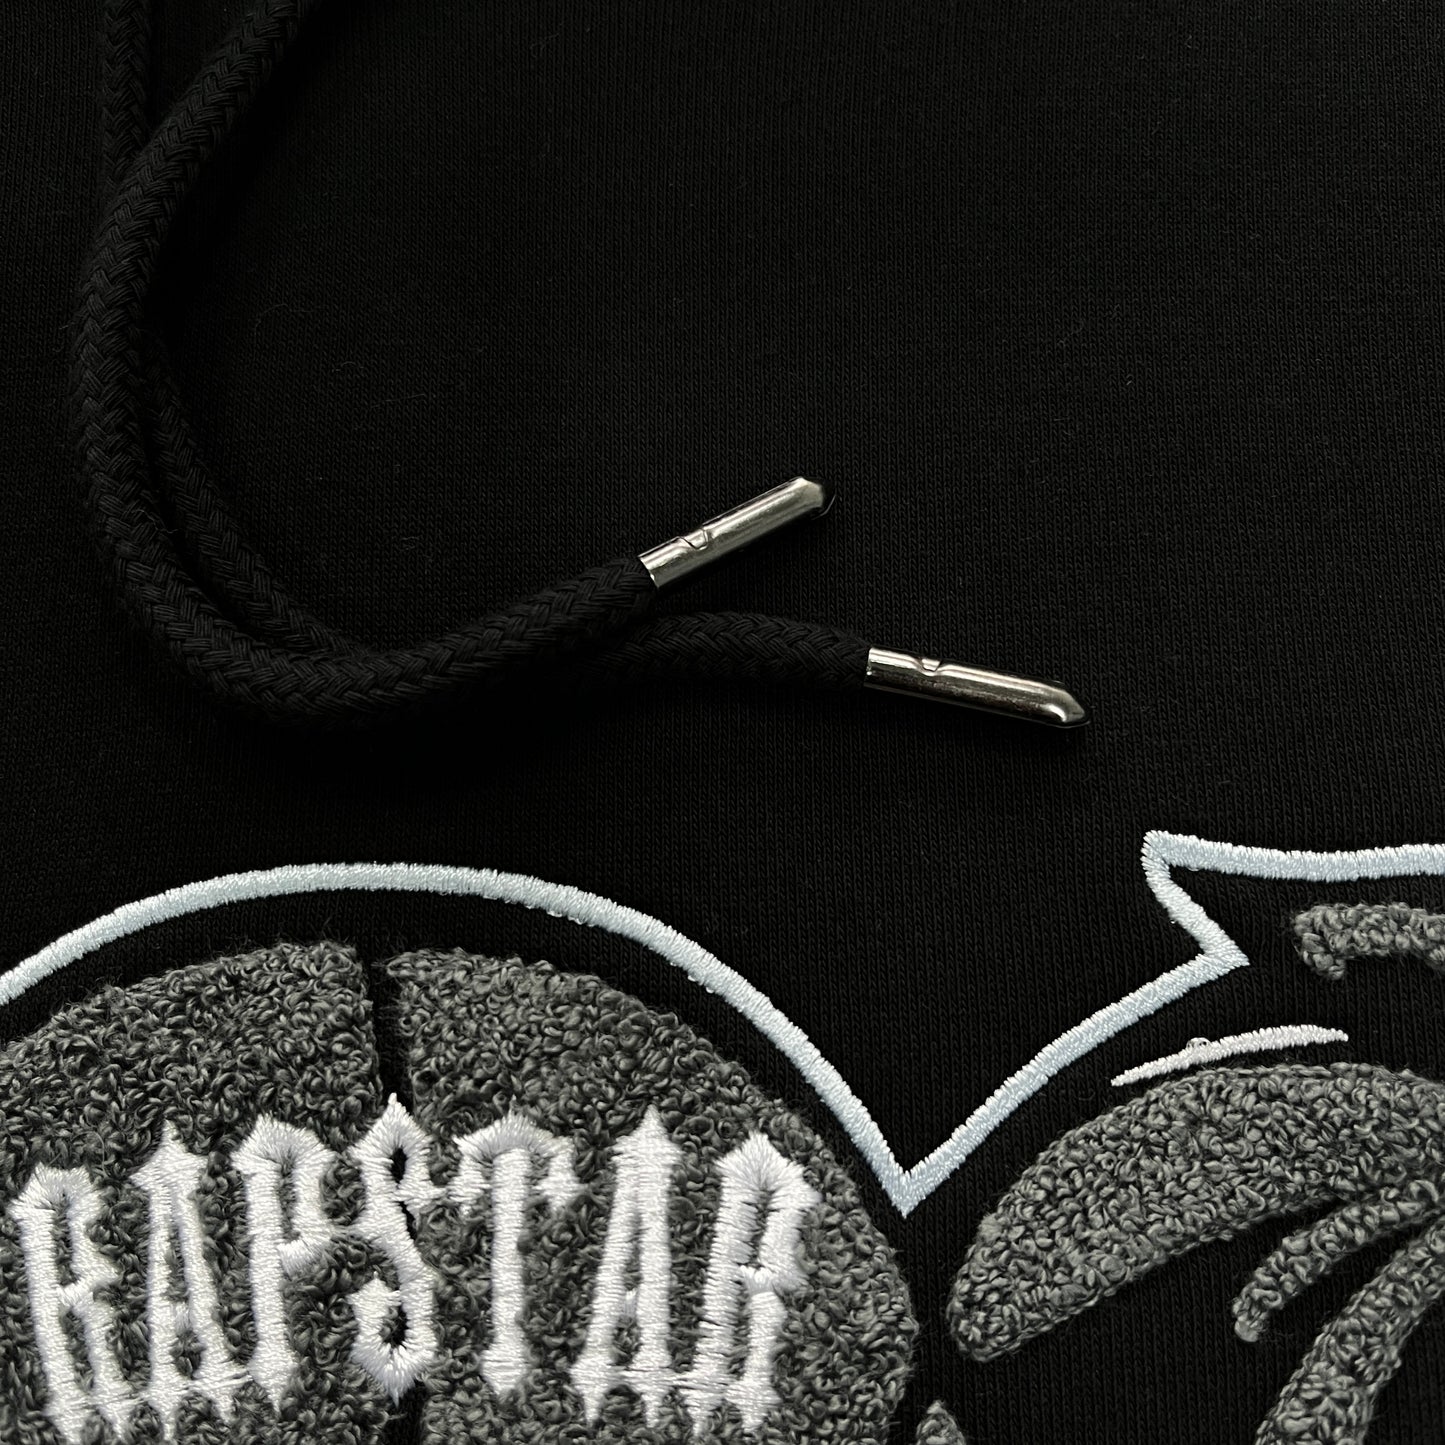 Trapstar Shooters Hoodie Tracksuit - (BLACK/SKYBLUE)